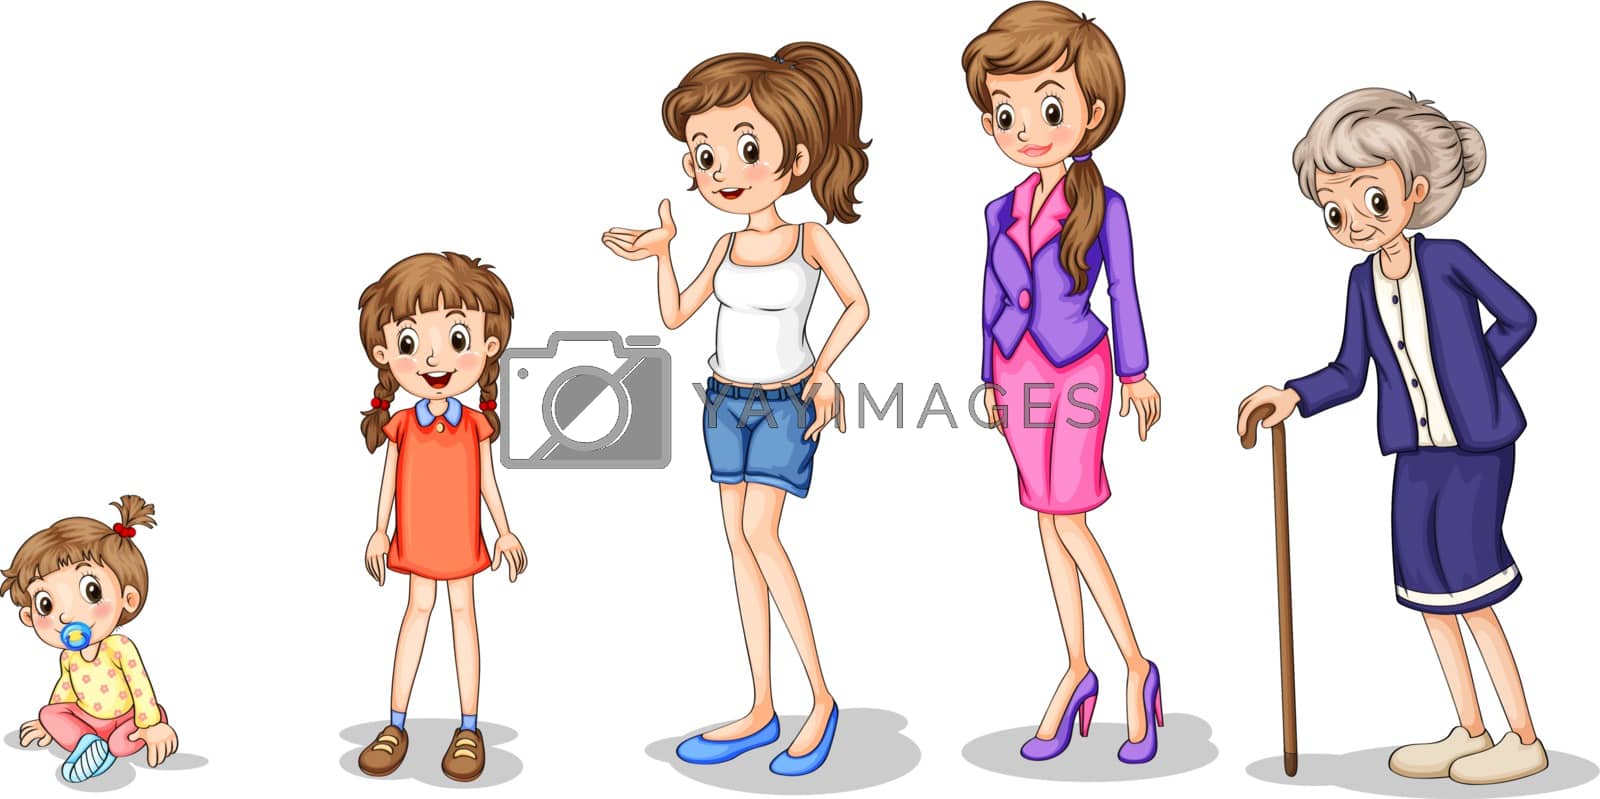 Royalty free image of Phases of a growing female by iimages